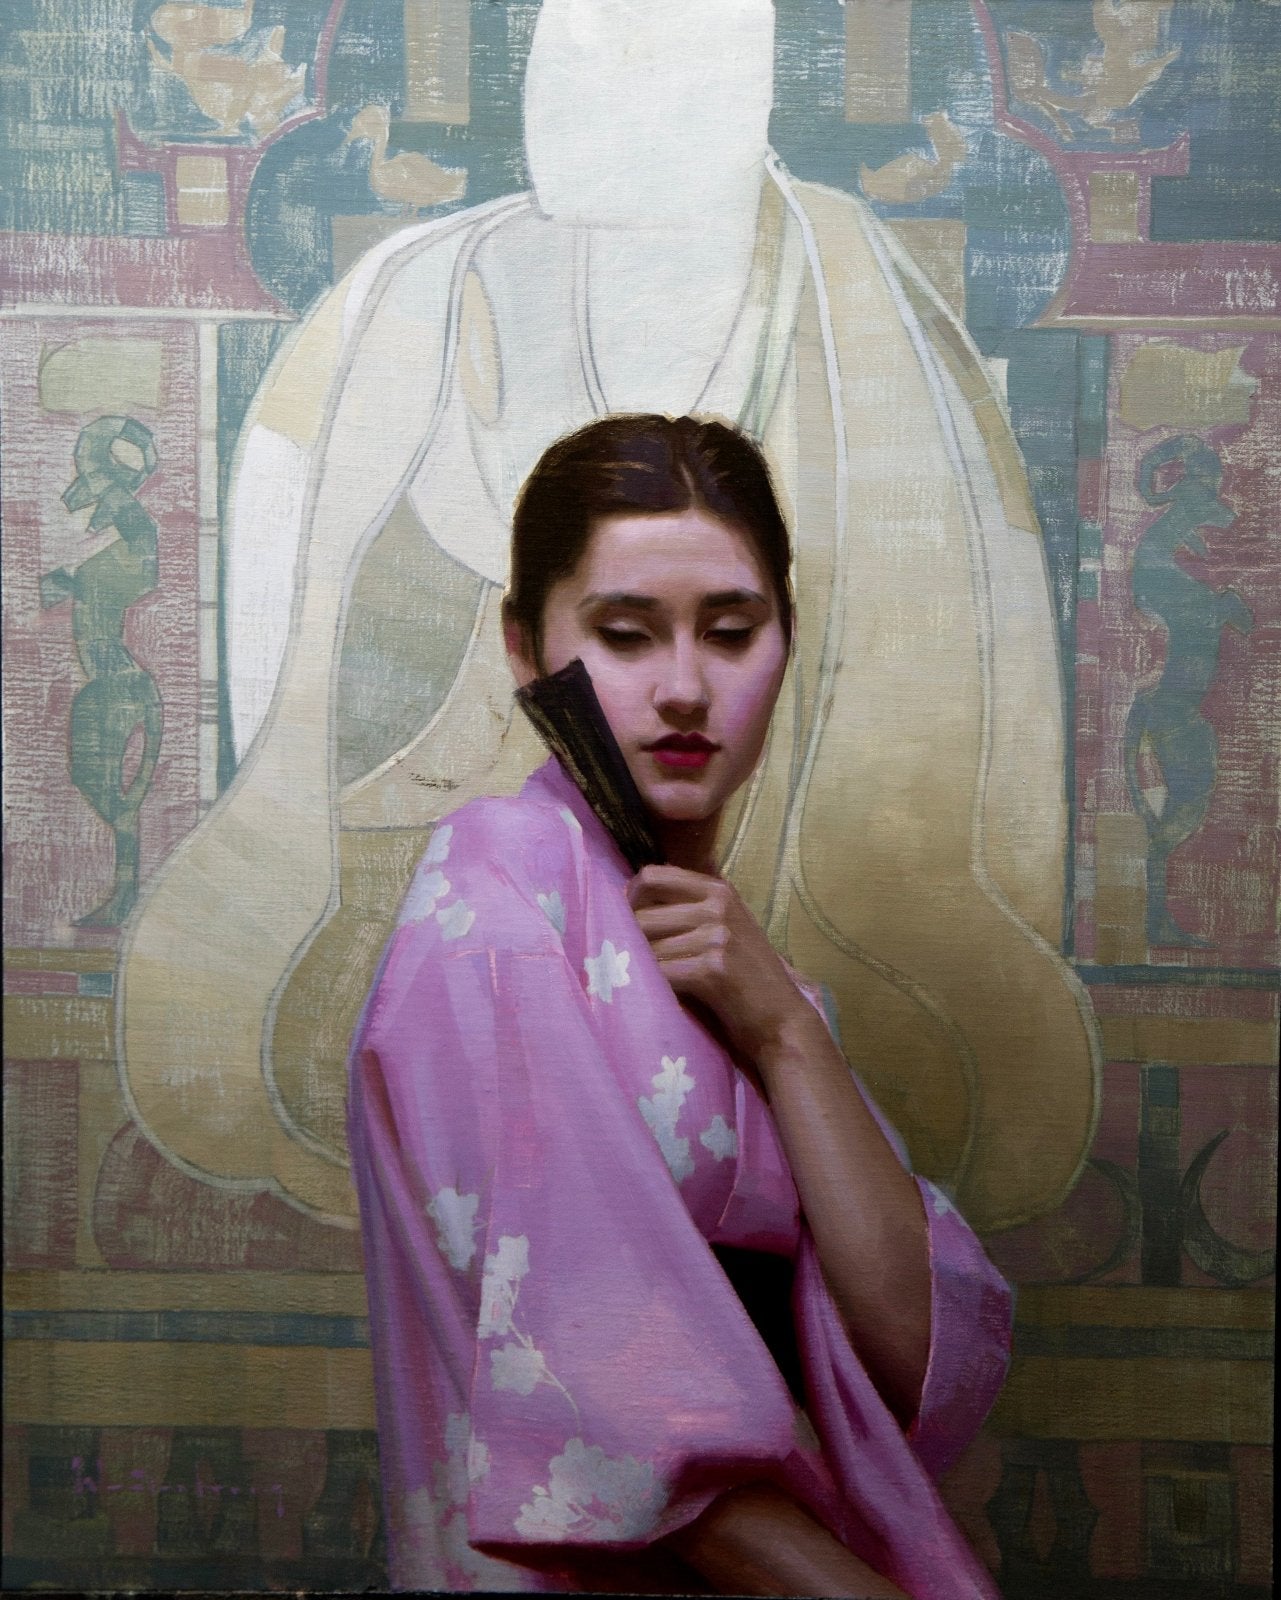 Clear Sight by Aaron Westerberg at LePrince Galleries